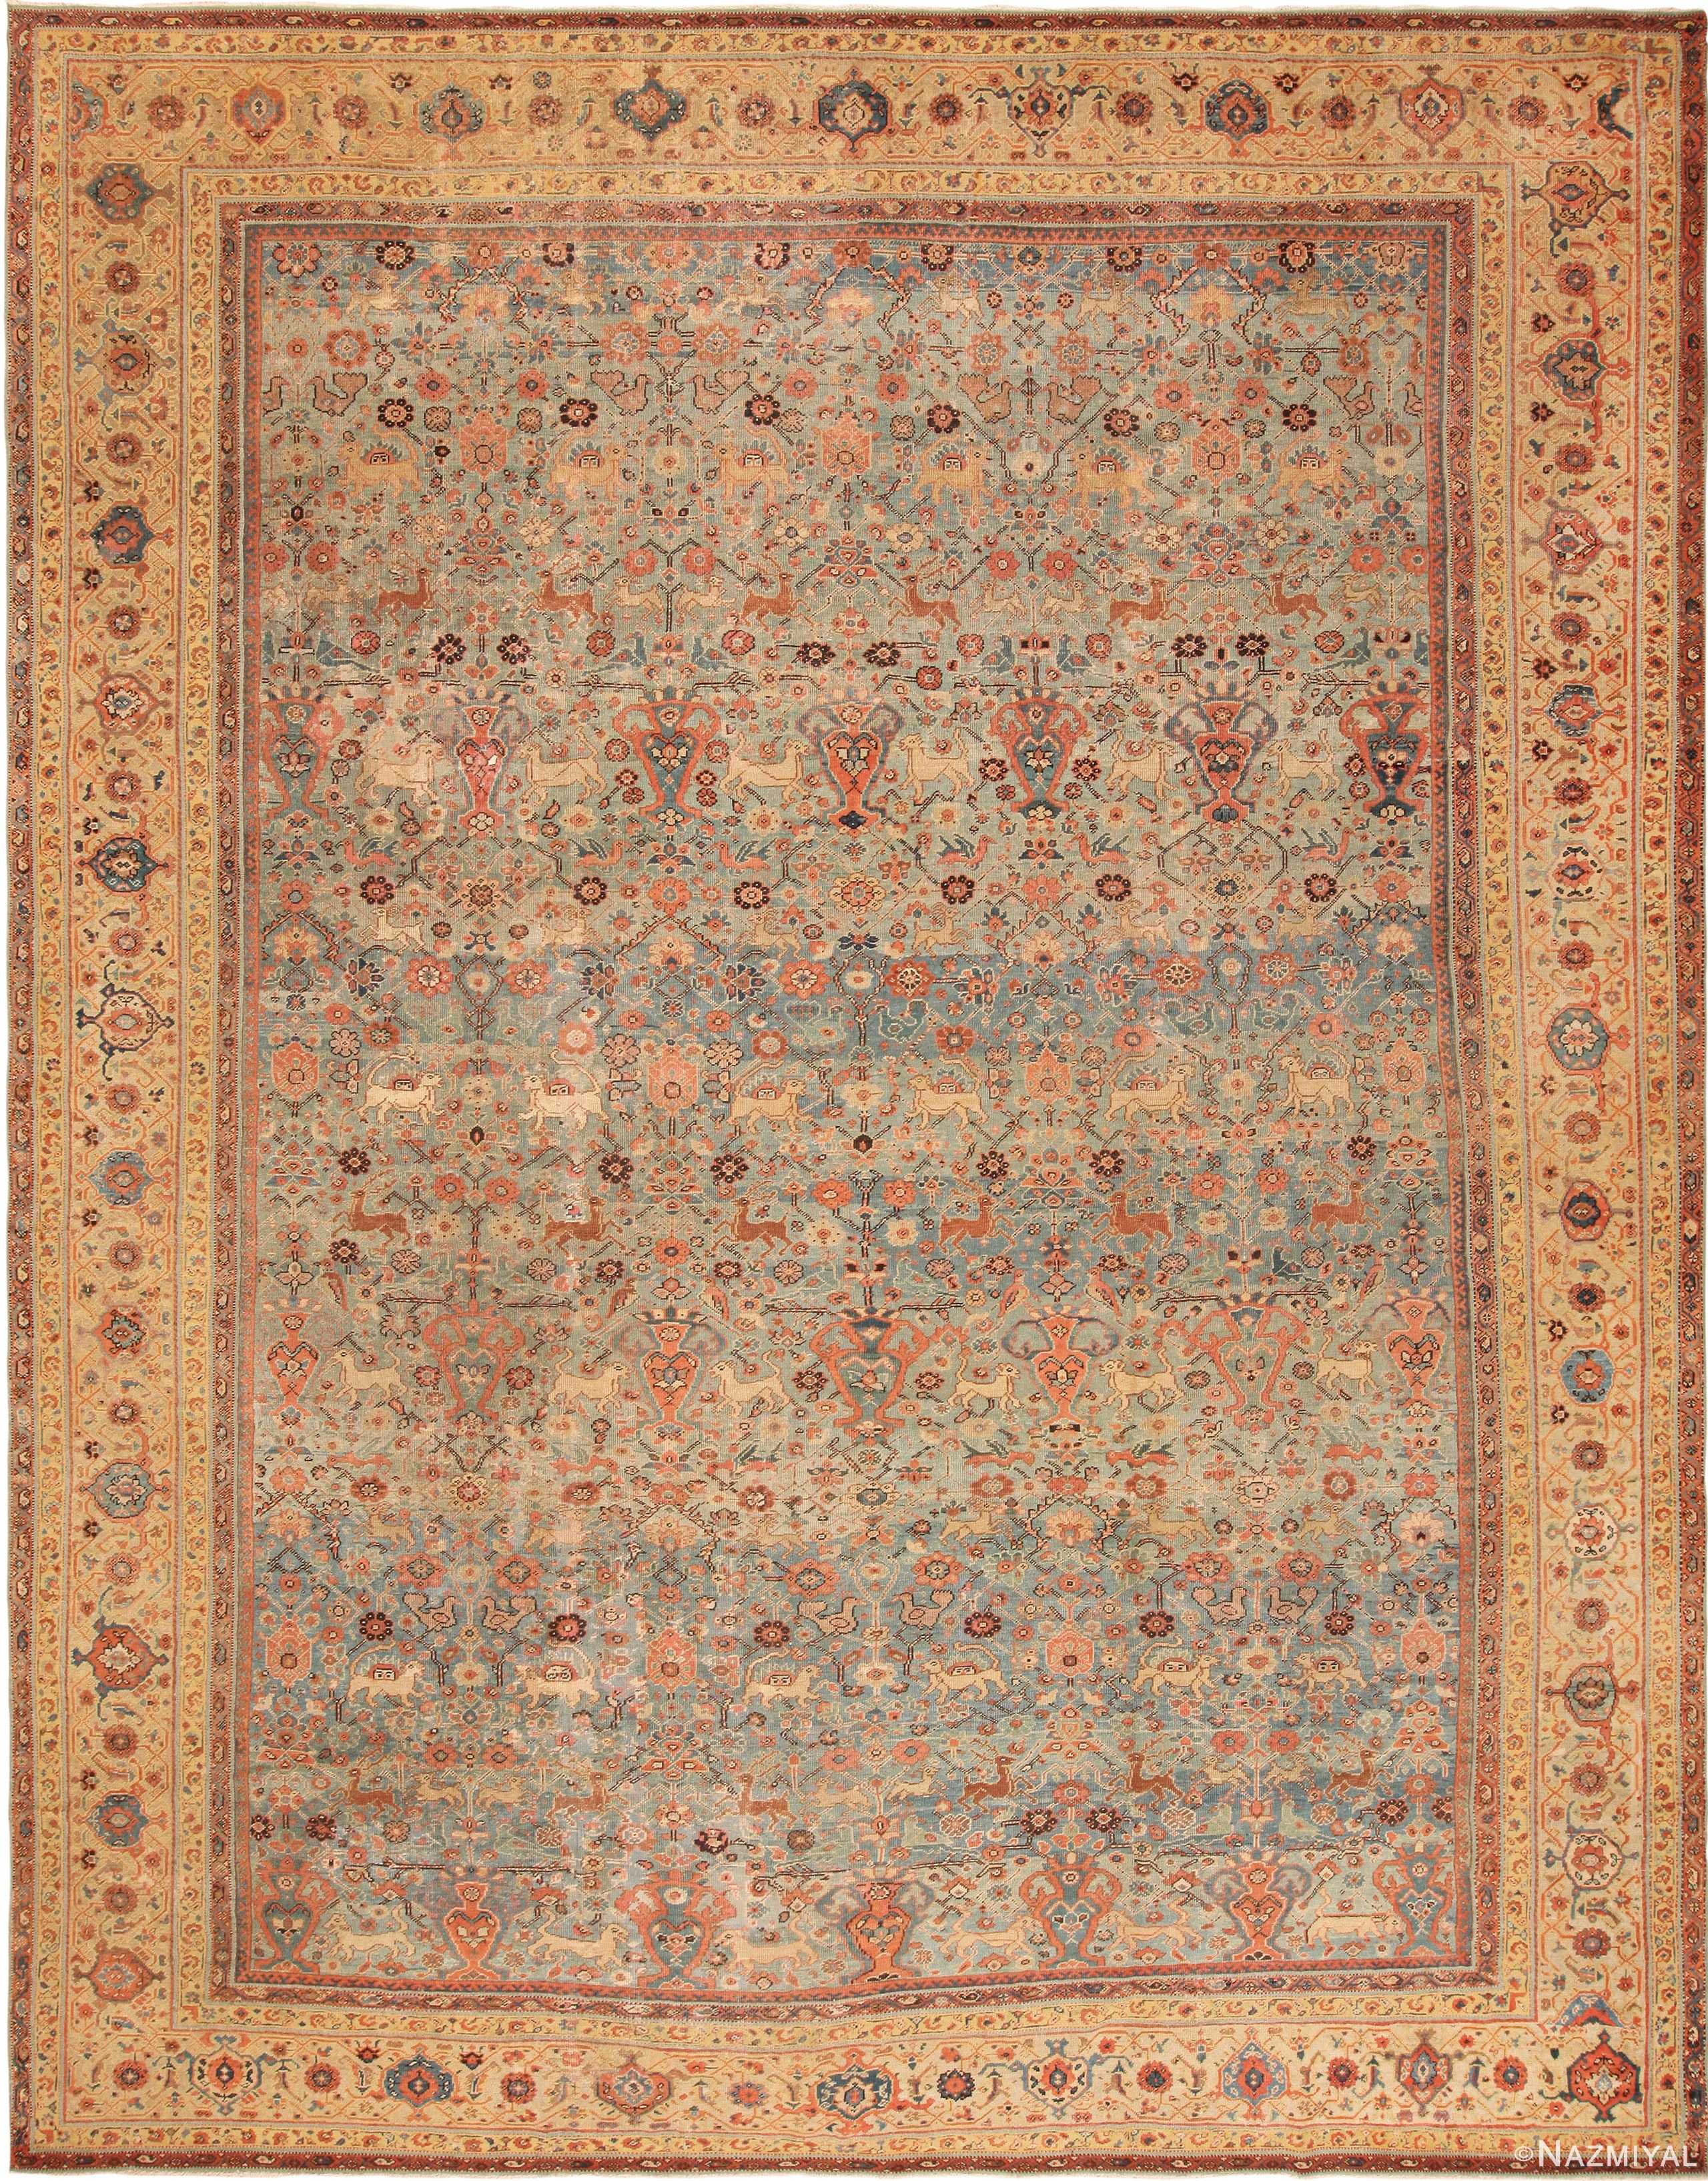 Large Antique Persian Animal Design Sultanabad Rug 71476 by Nazmiyal Antique Rugs